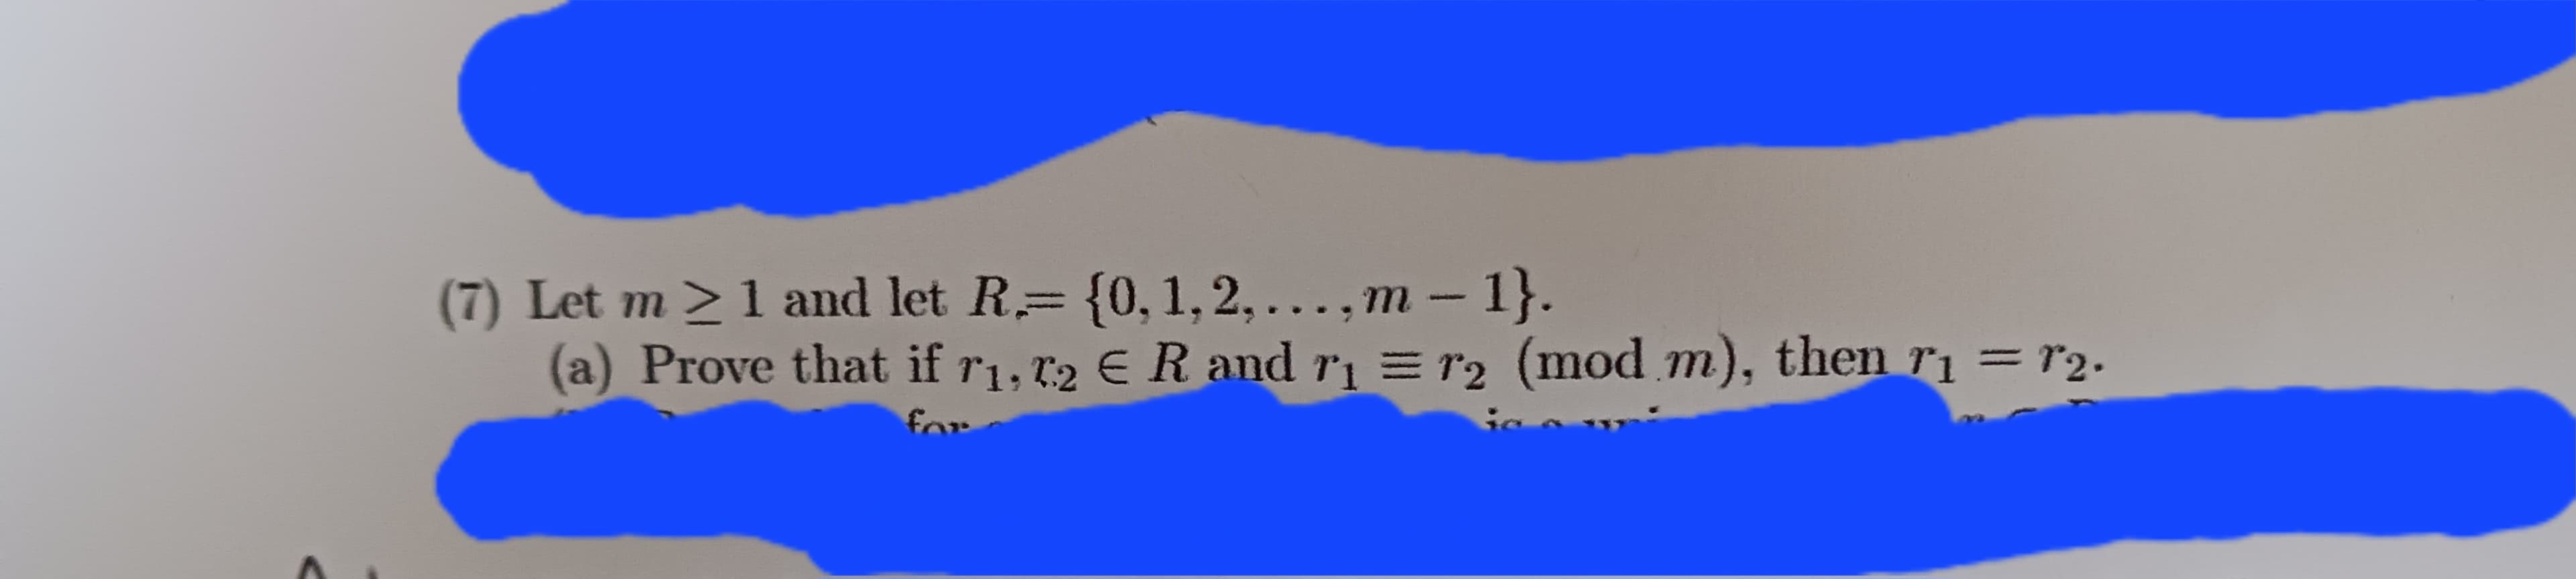 (7) Let m≥ 1 and let R= {0, 1, 2,...,m - 1}.
12.
(a) Prove that if r₁, 2 E R and r₁ r2 (mod m), then r₁ = 7₂.
for